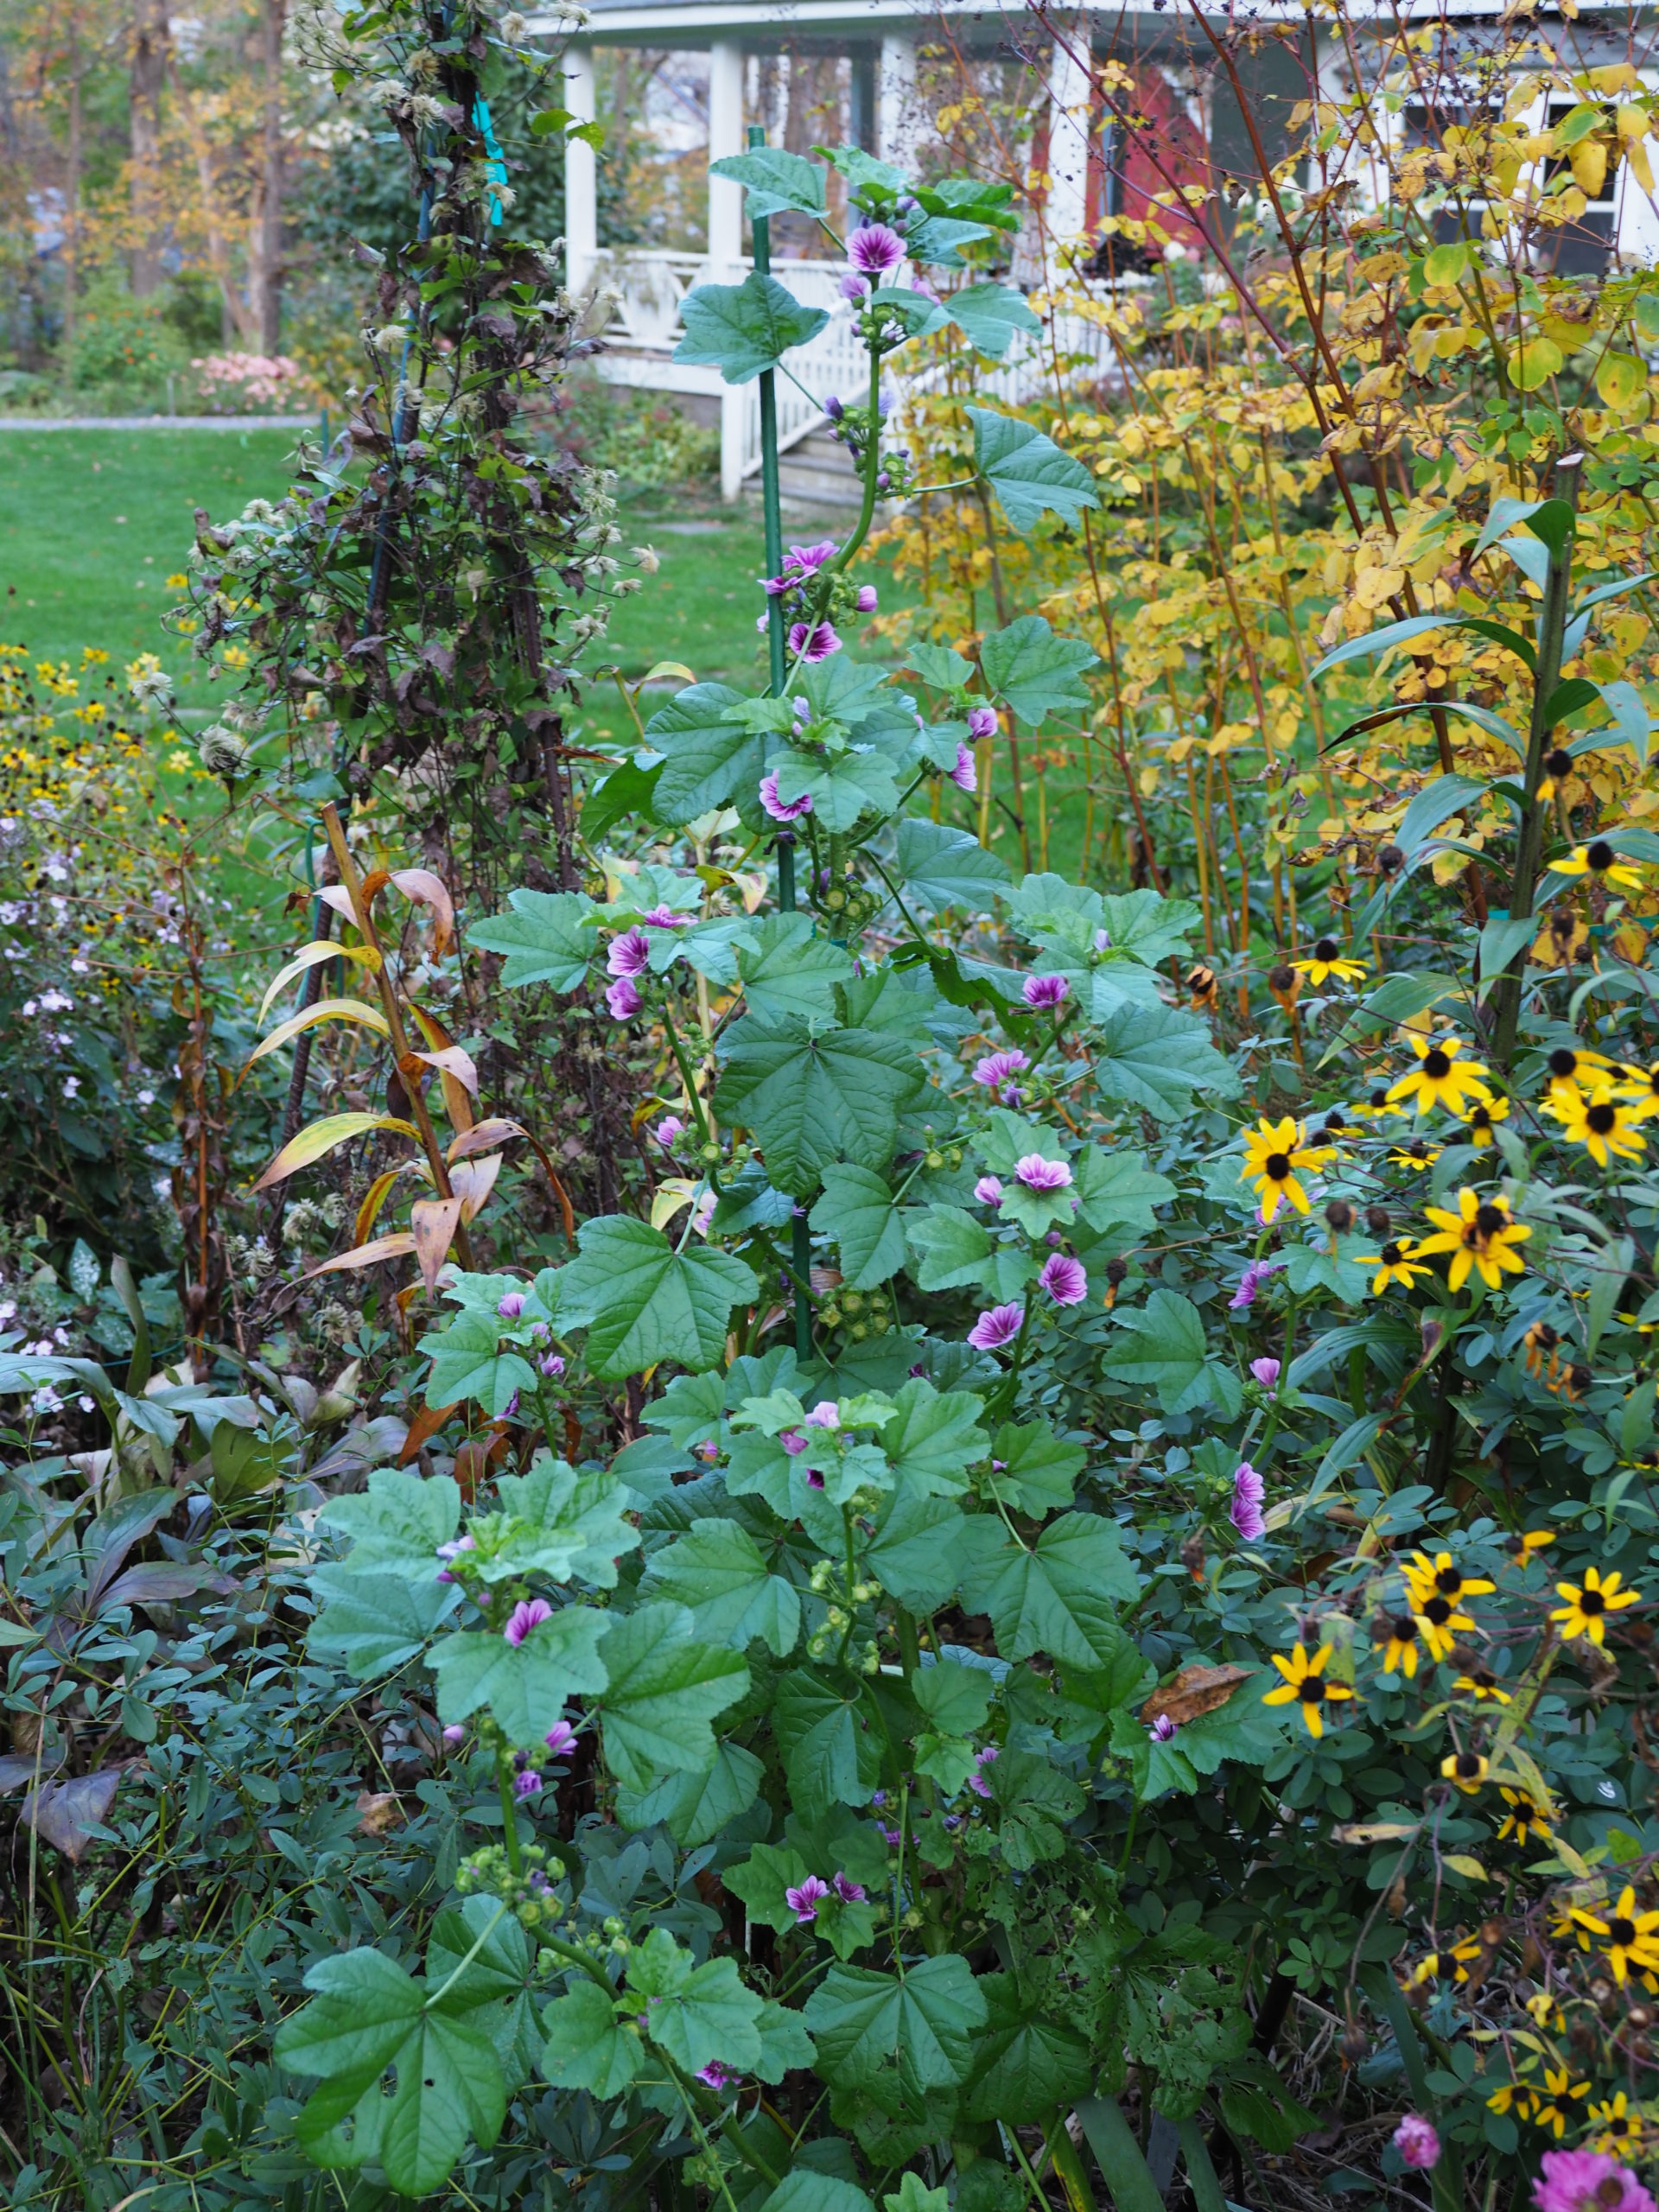 The French Hollyhock got so large it had to be staked, and in this photo it’s pushing over 5 feet tall.